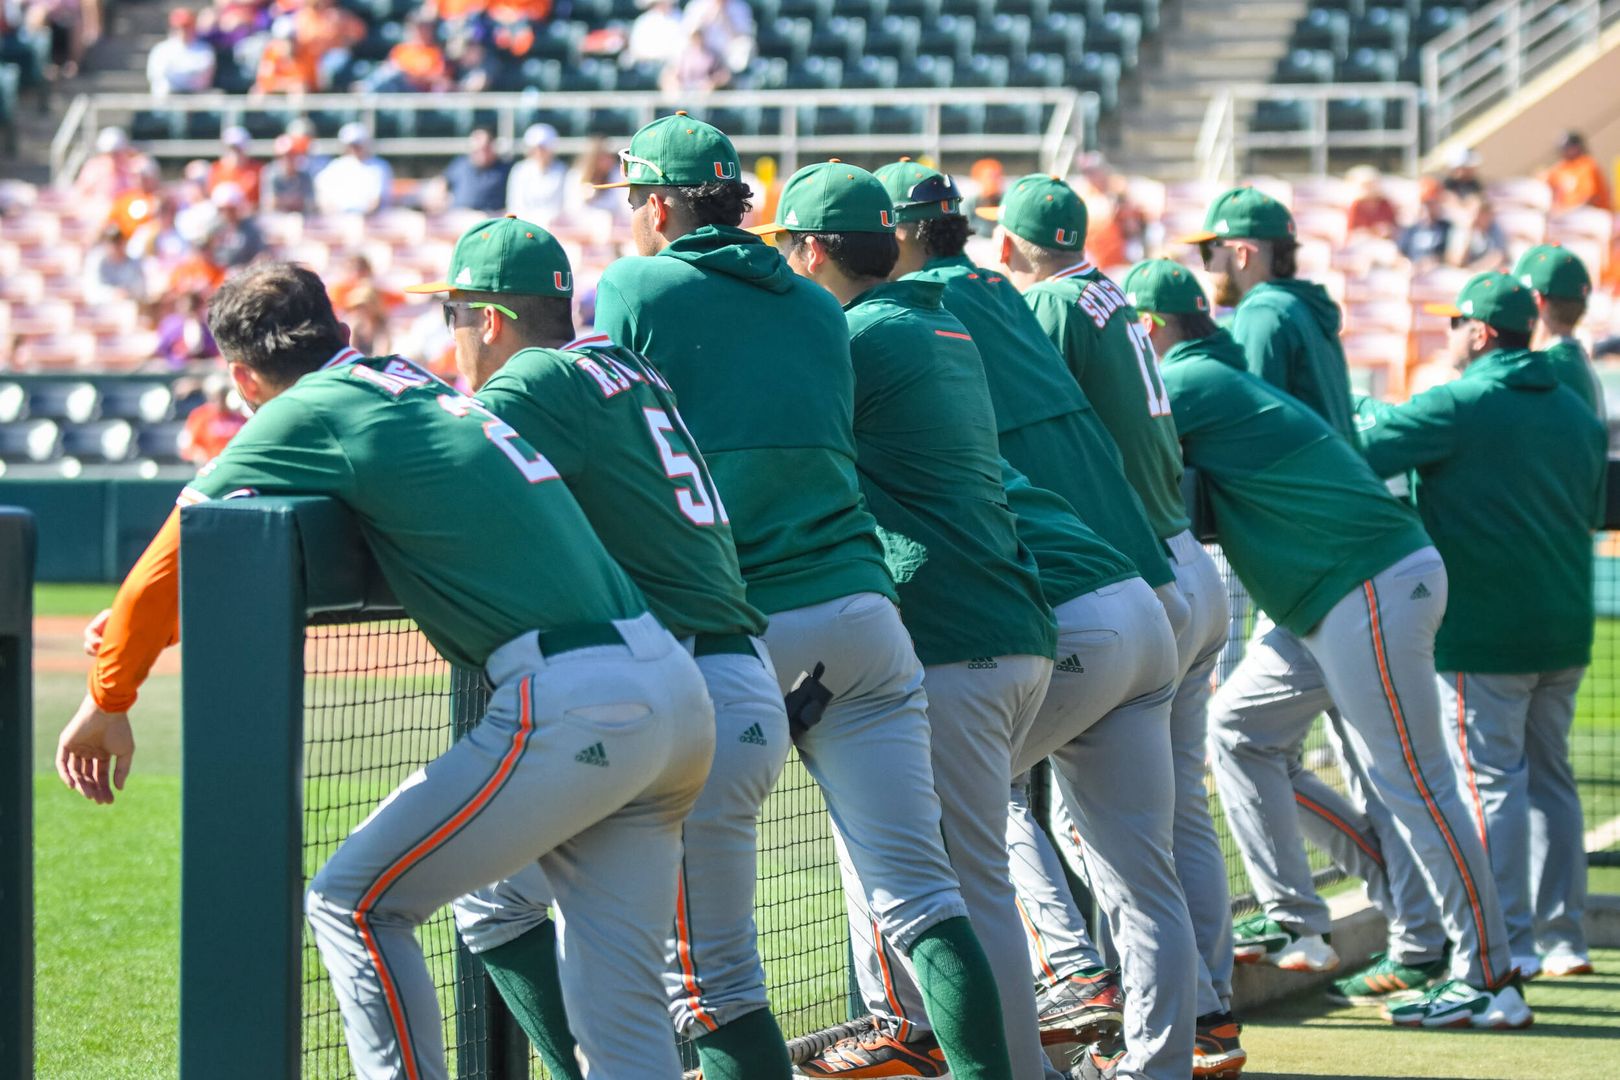 Miami Falls in Series Finale to No. 18 Clemson